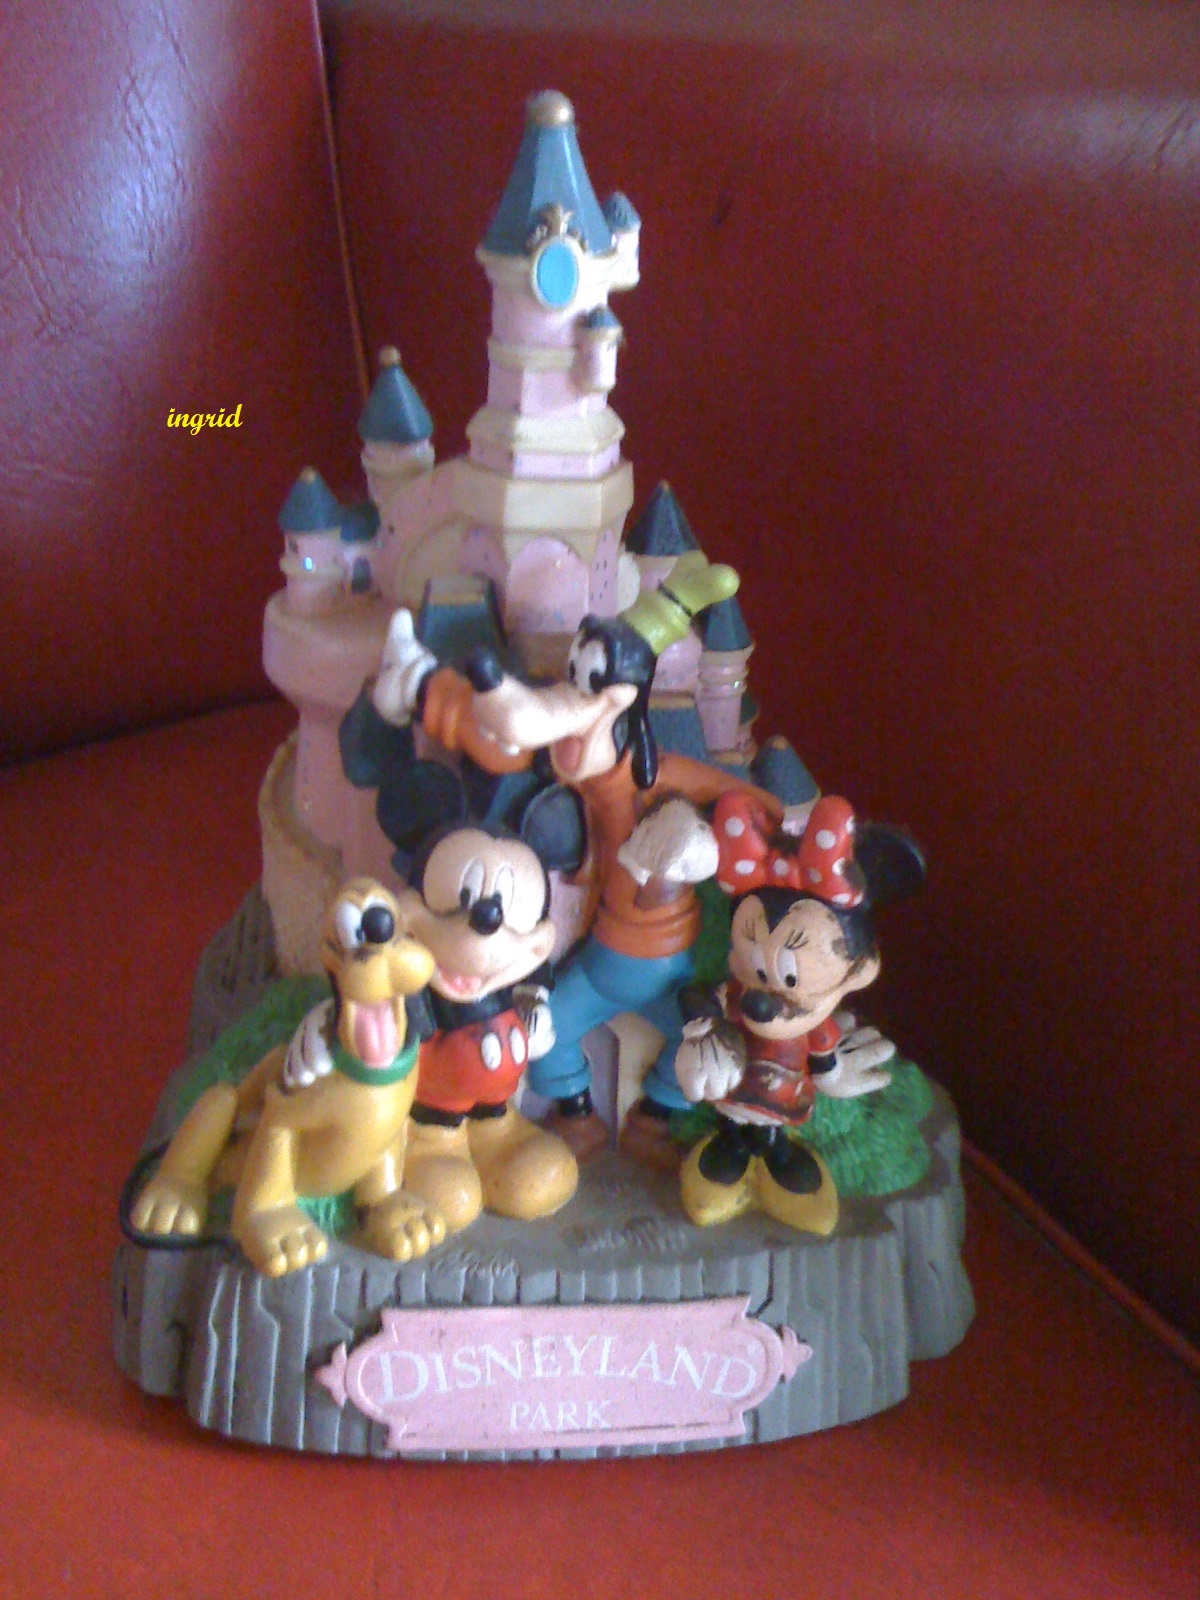 a figurine of walt Disney characters from our cabinet